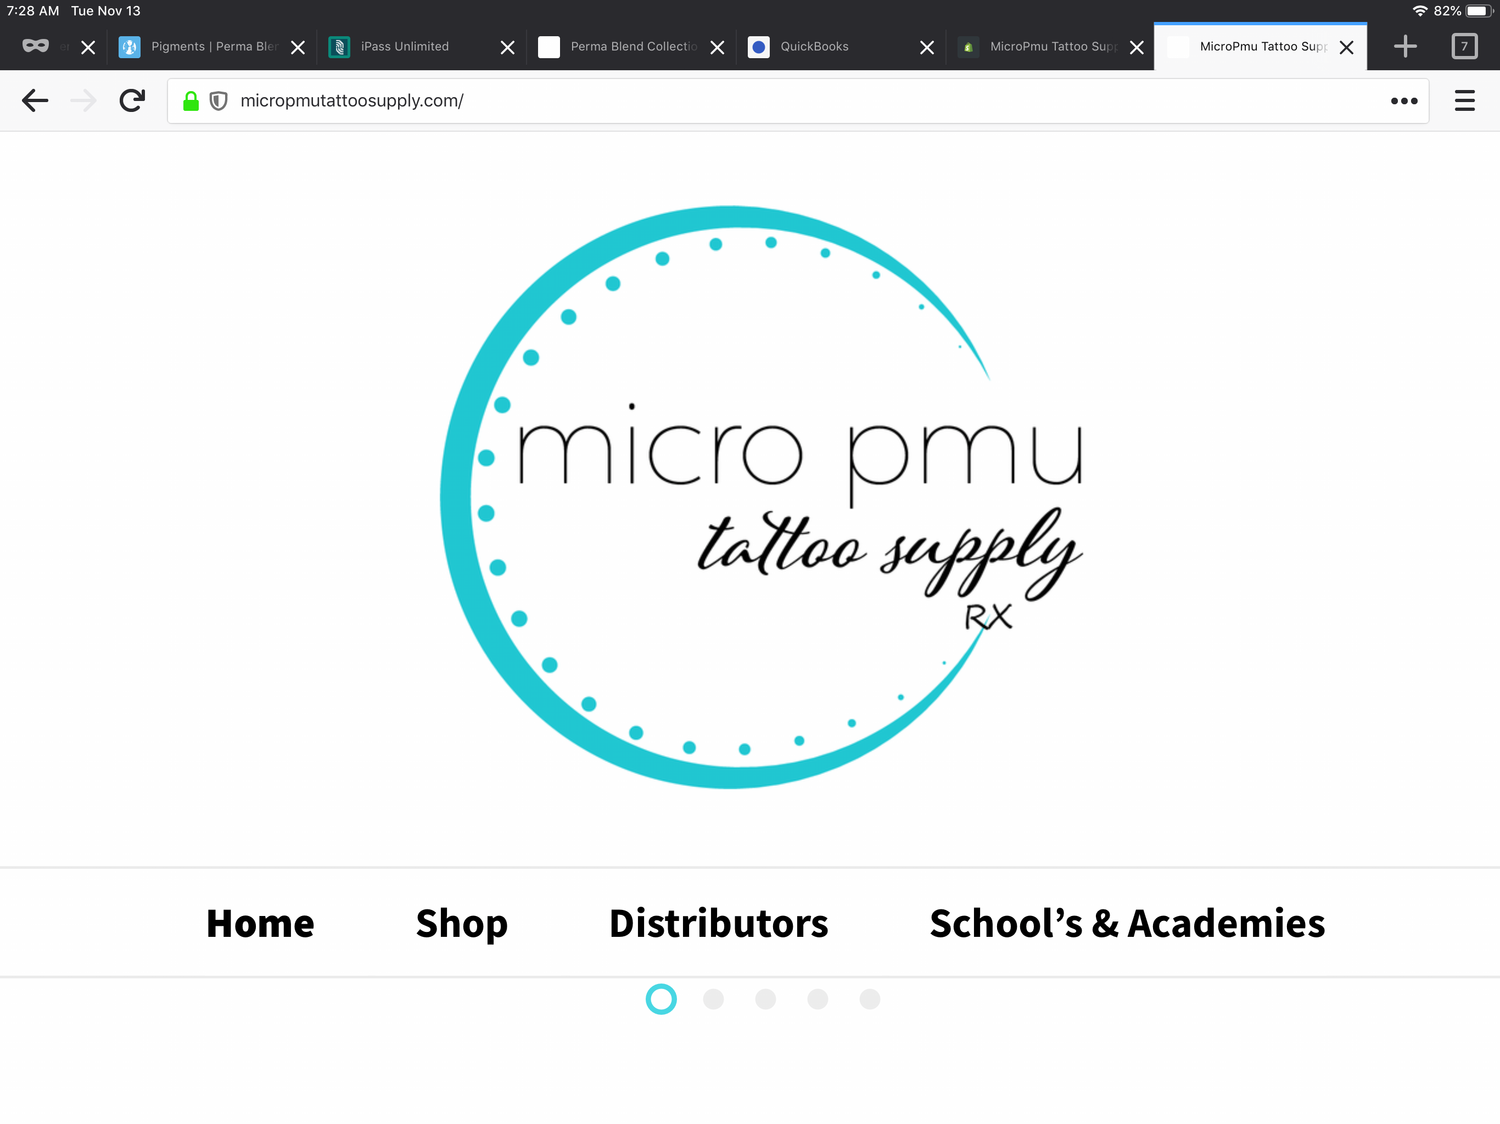 We are so excited to add our Academy & School tab to our site! MicroPmu Tattoo Supply